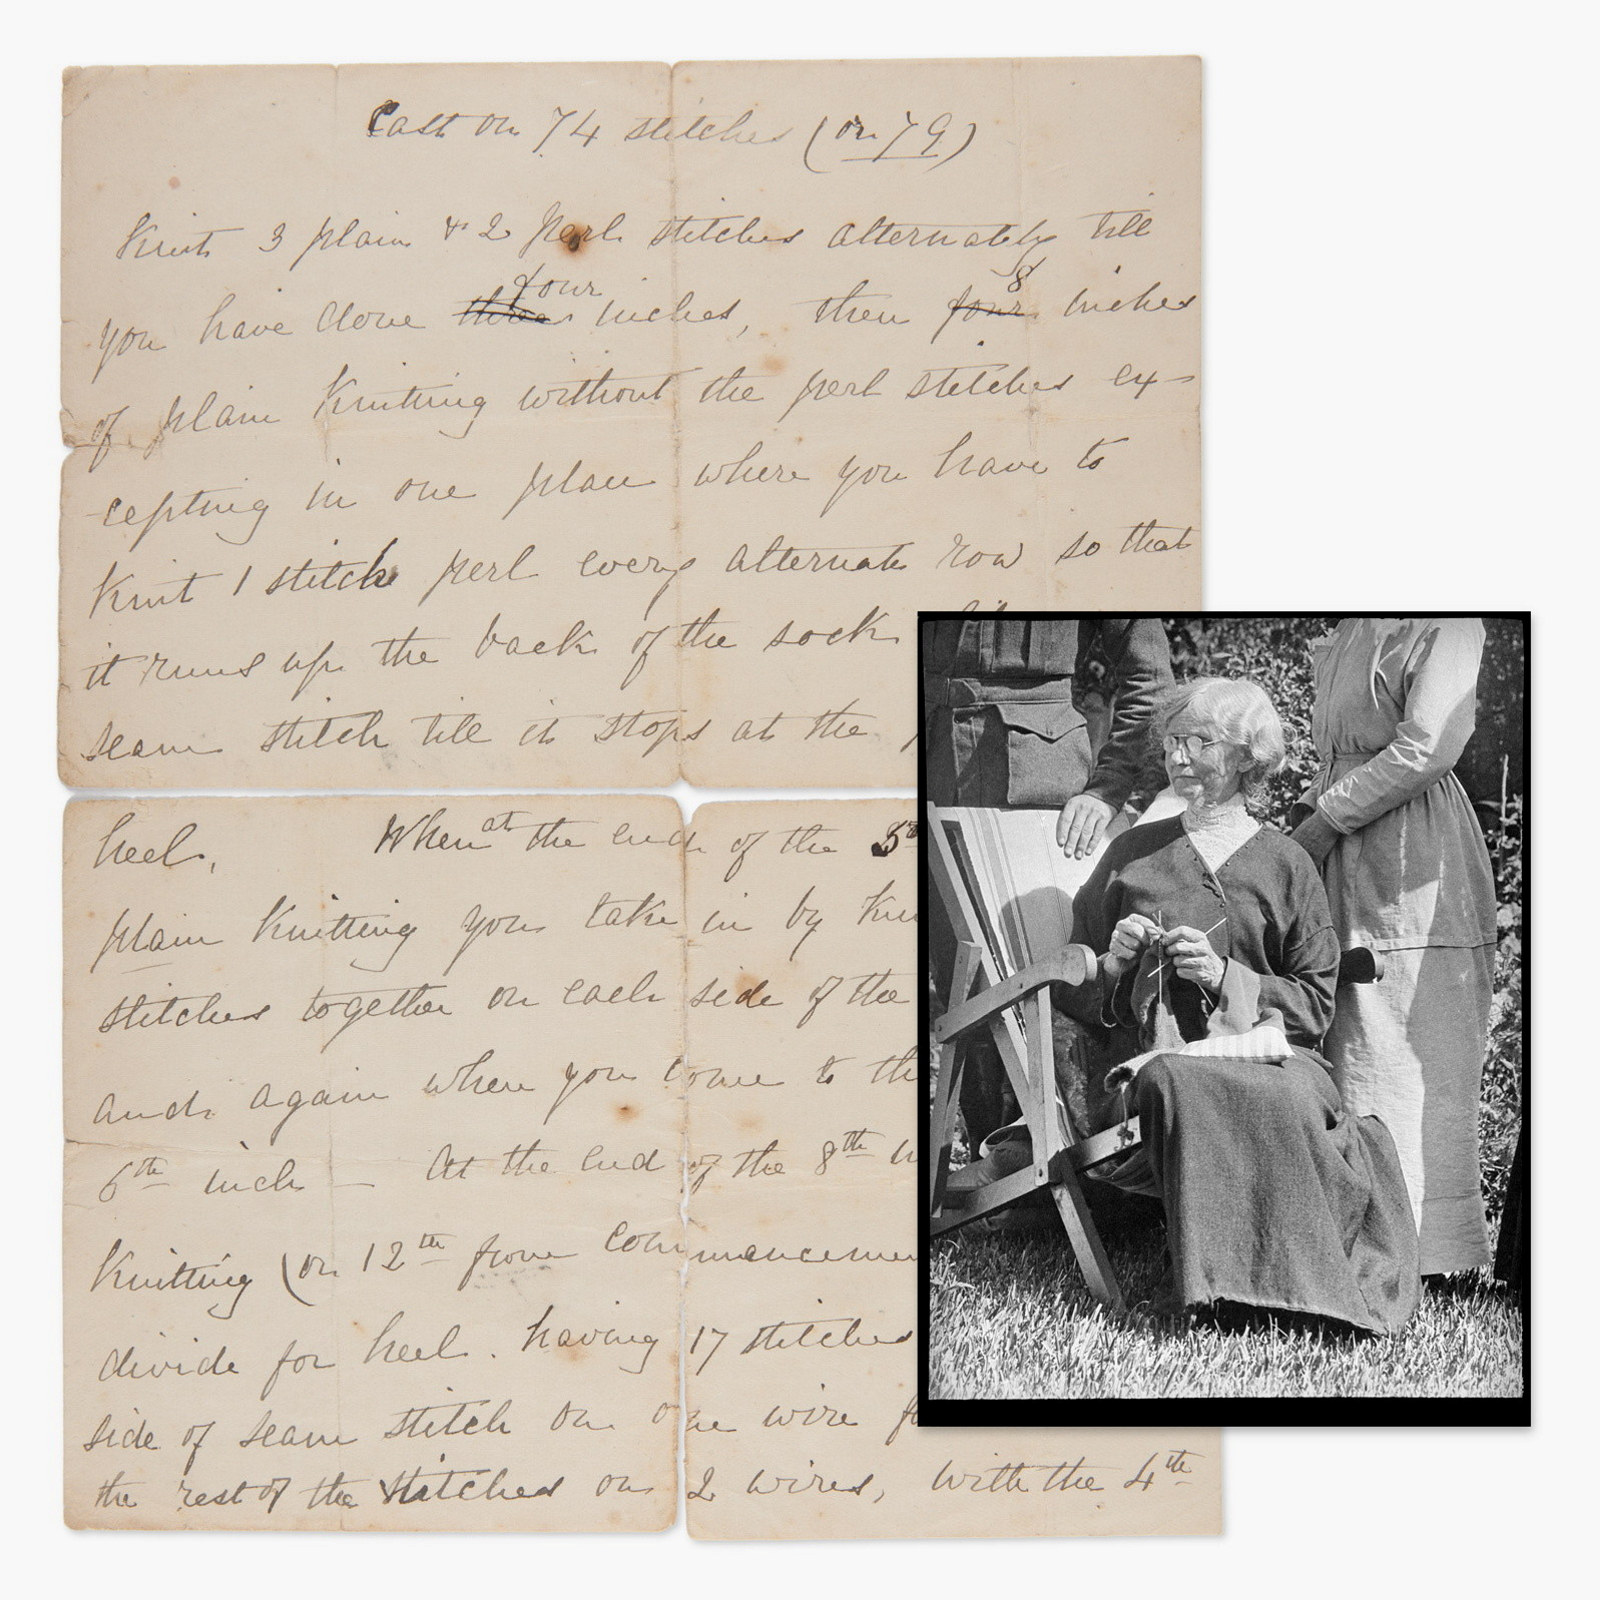 Handwritten letter overlaid with black and white photograph.